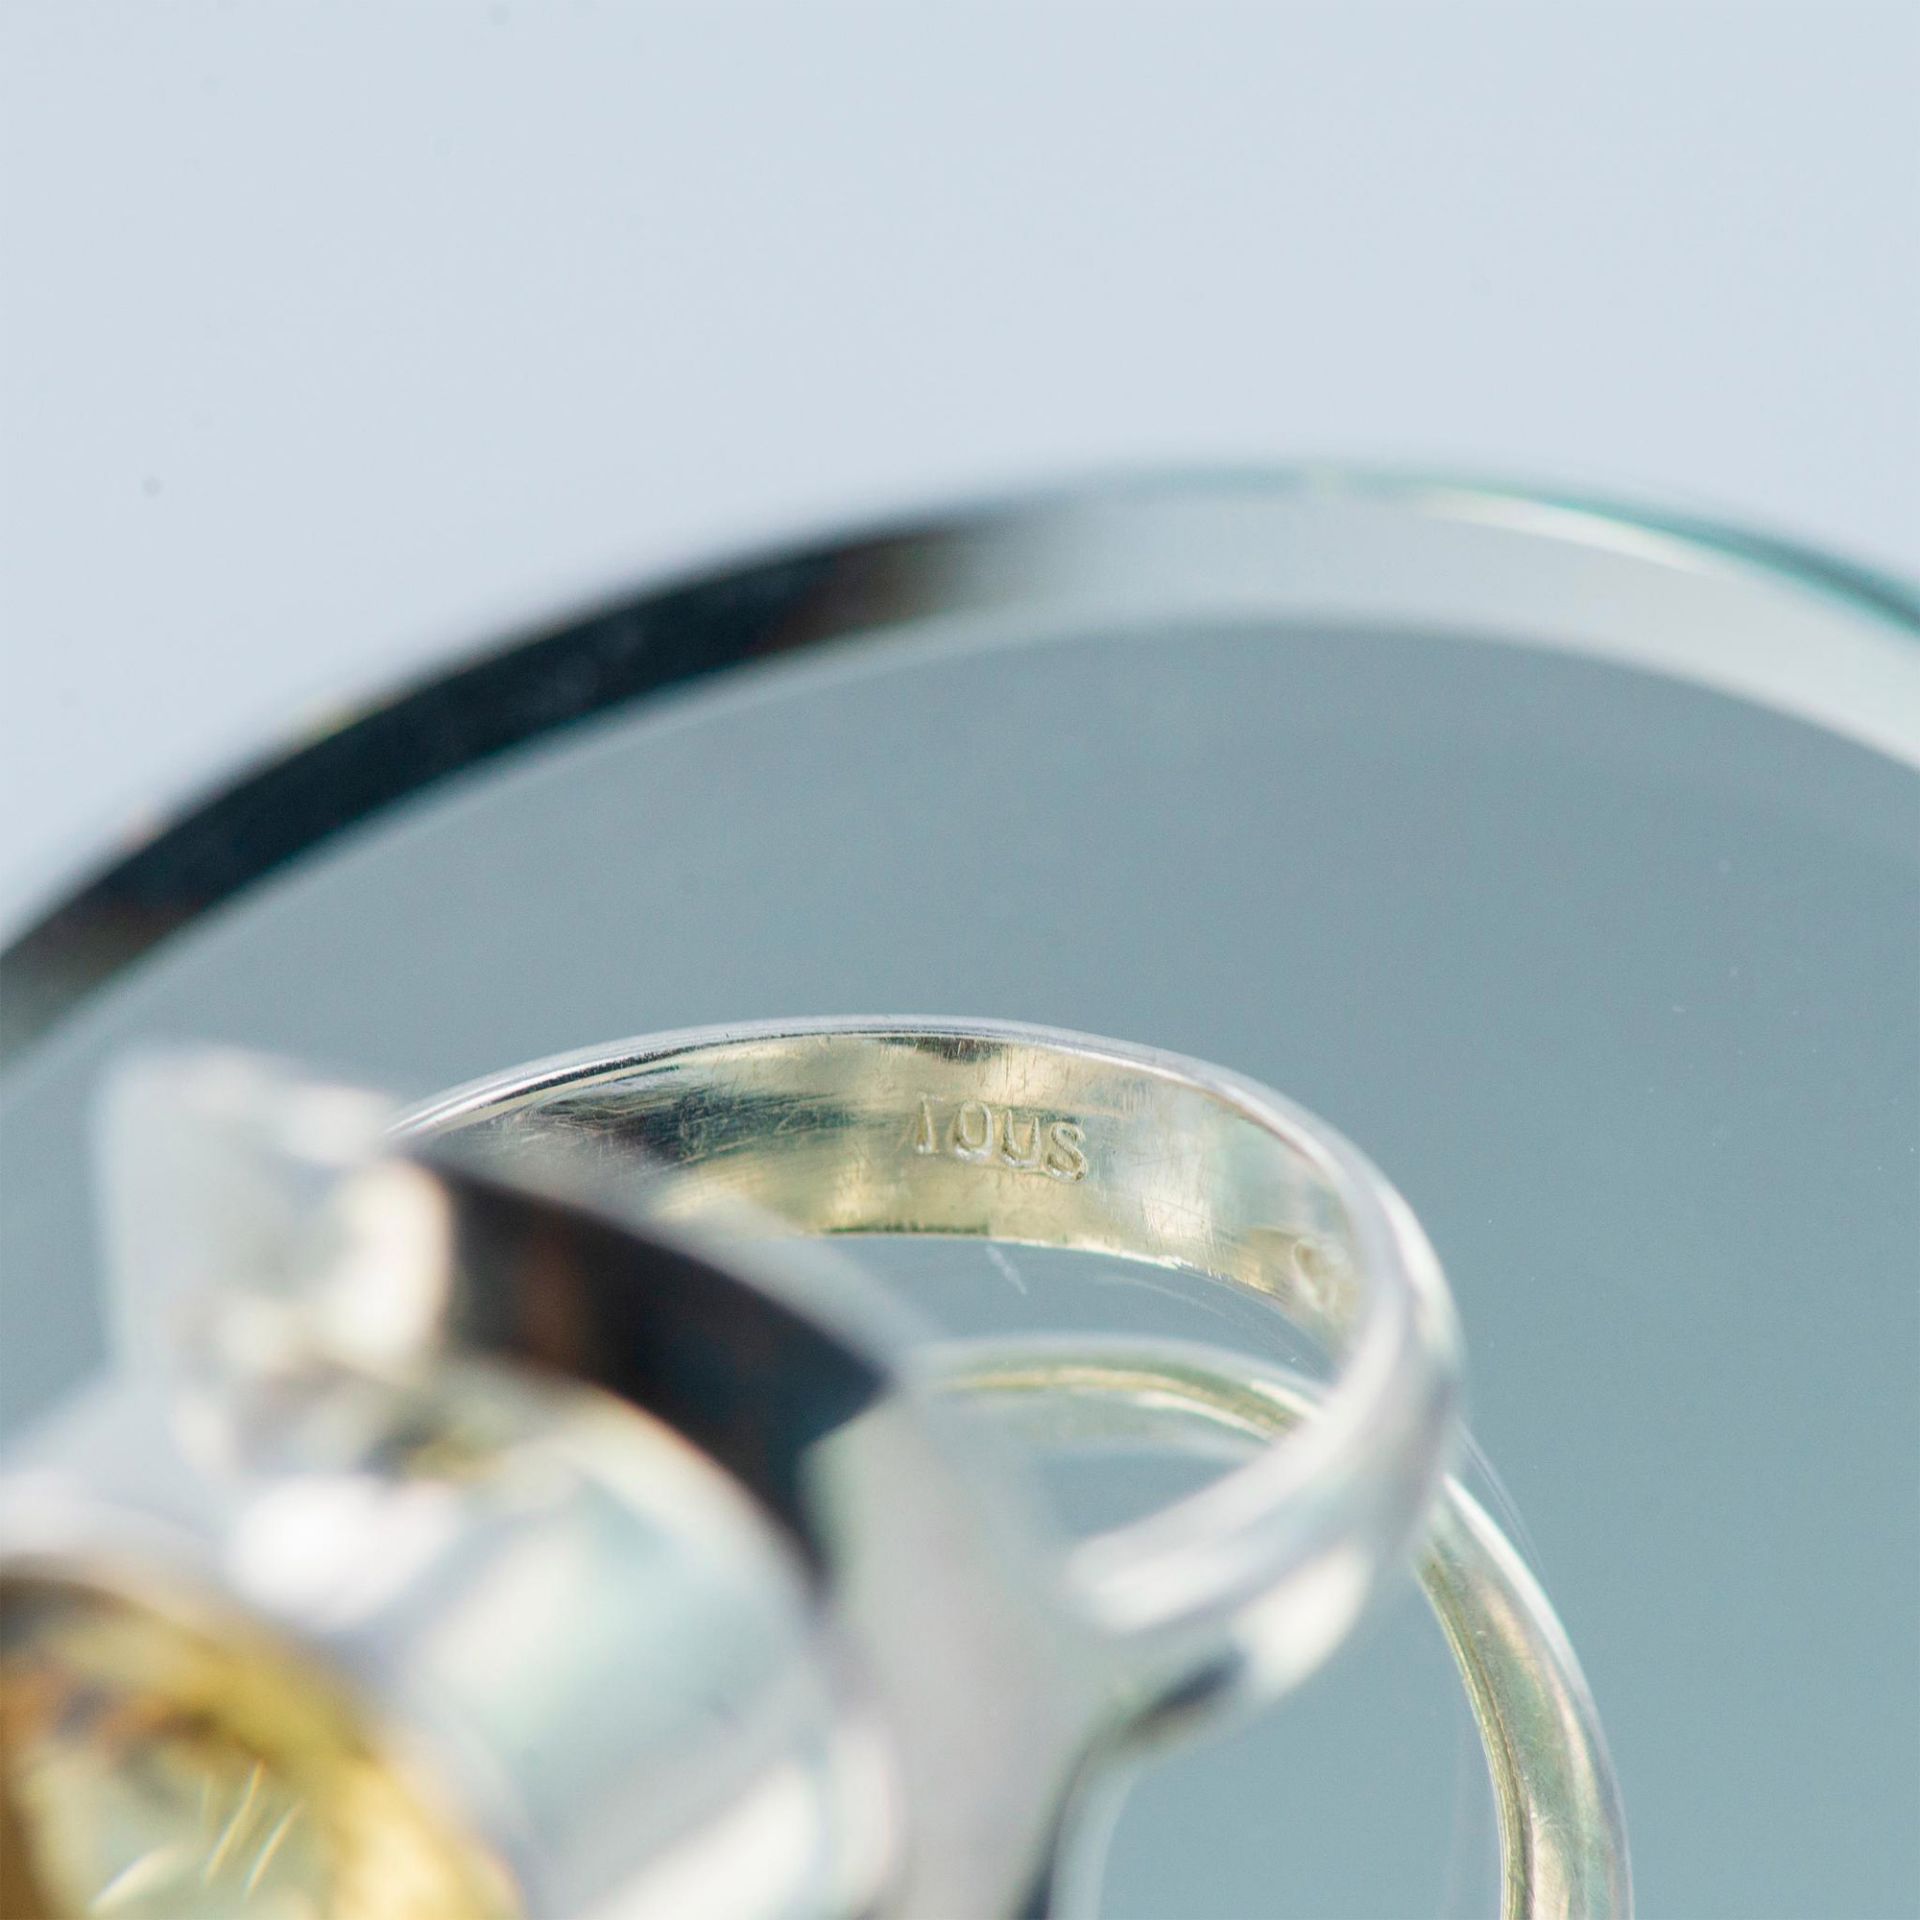 Tous Sterling Silver and Citrine Ring - Image 11 of 11